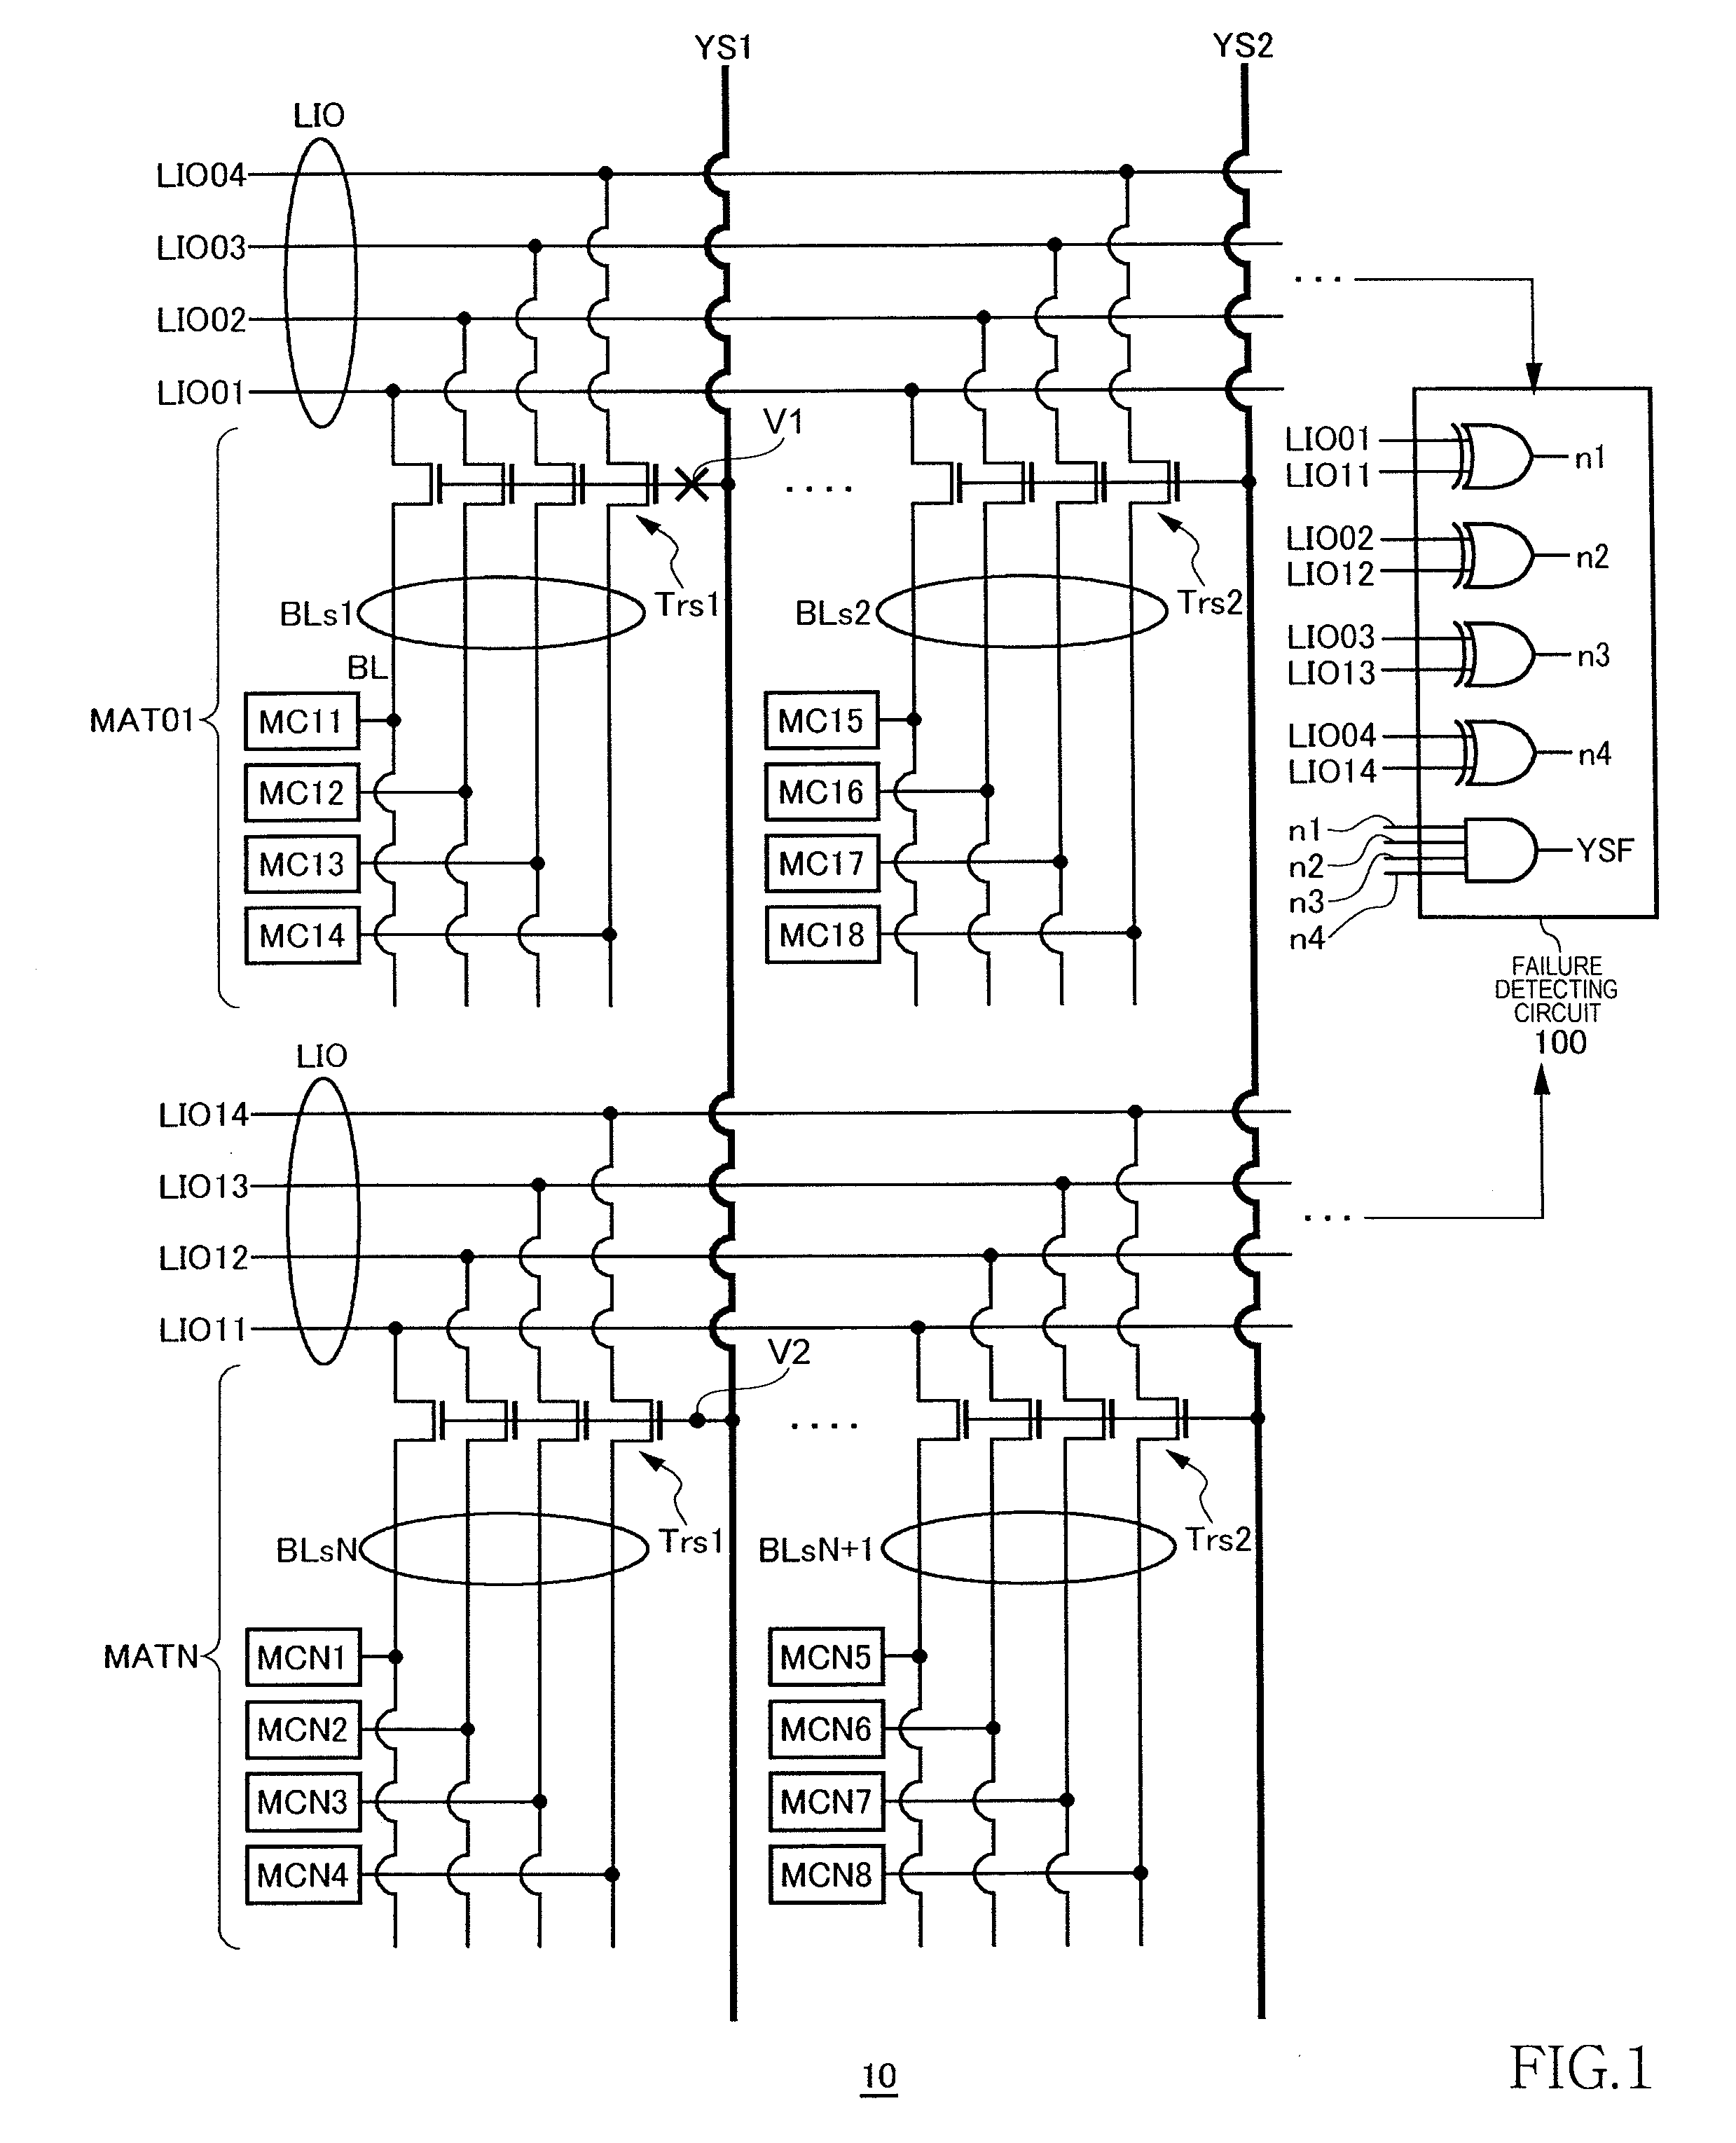 Semiconductor device having bit lines and local I/O lines